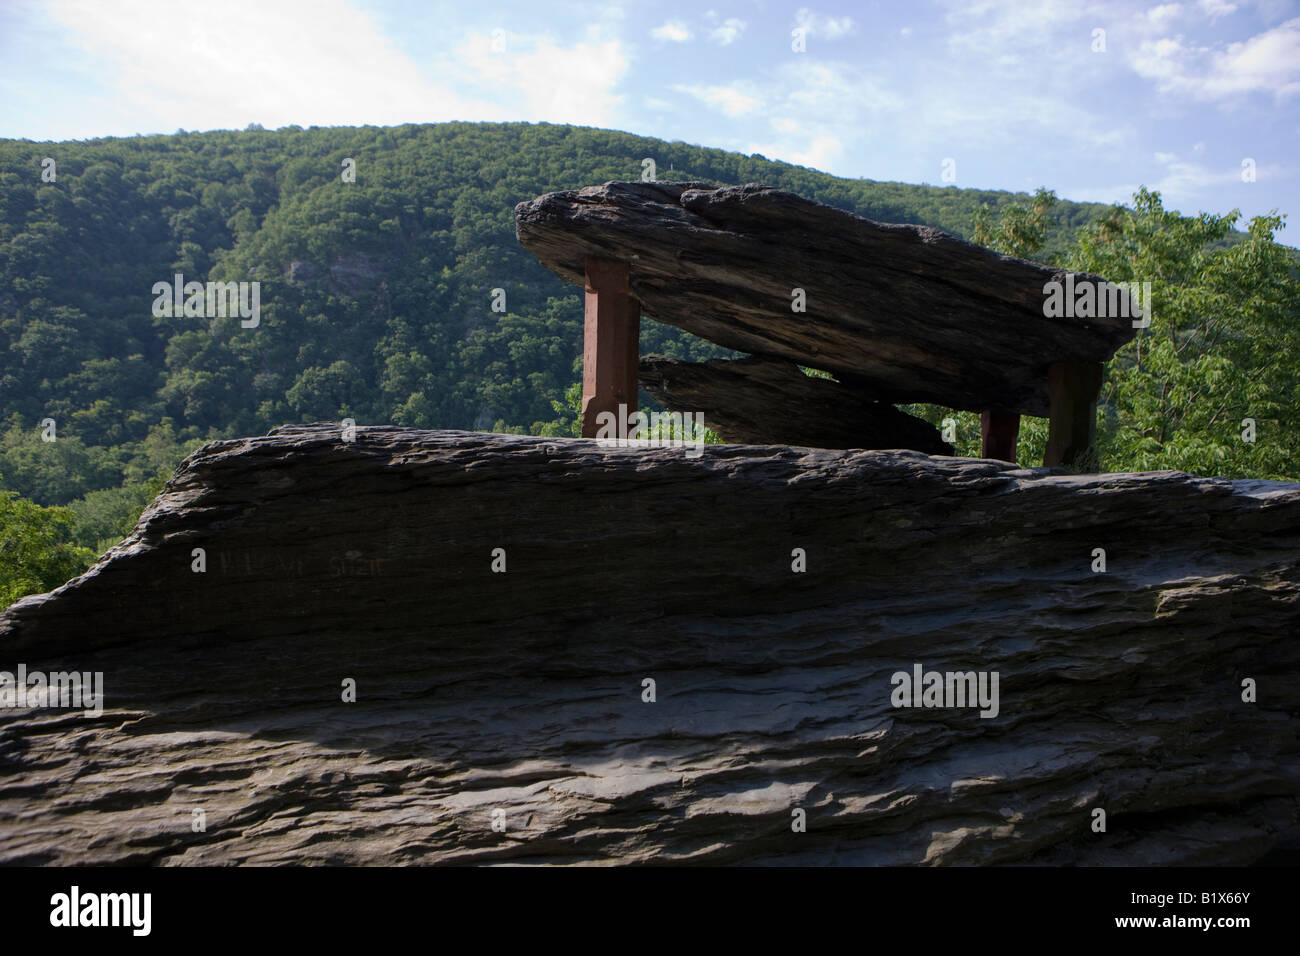 Jefferson Rock along the Appalachian Trail, Harpers Ferry National Historical Park, Harpers Ferry, West Virginia. Stock Photo